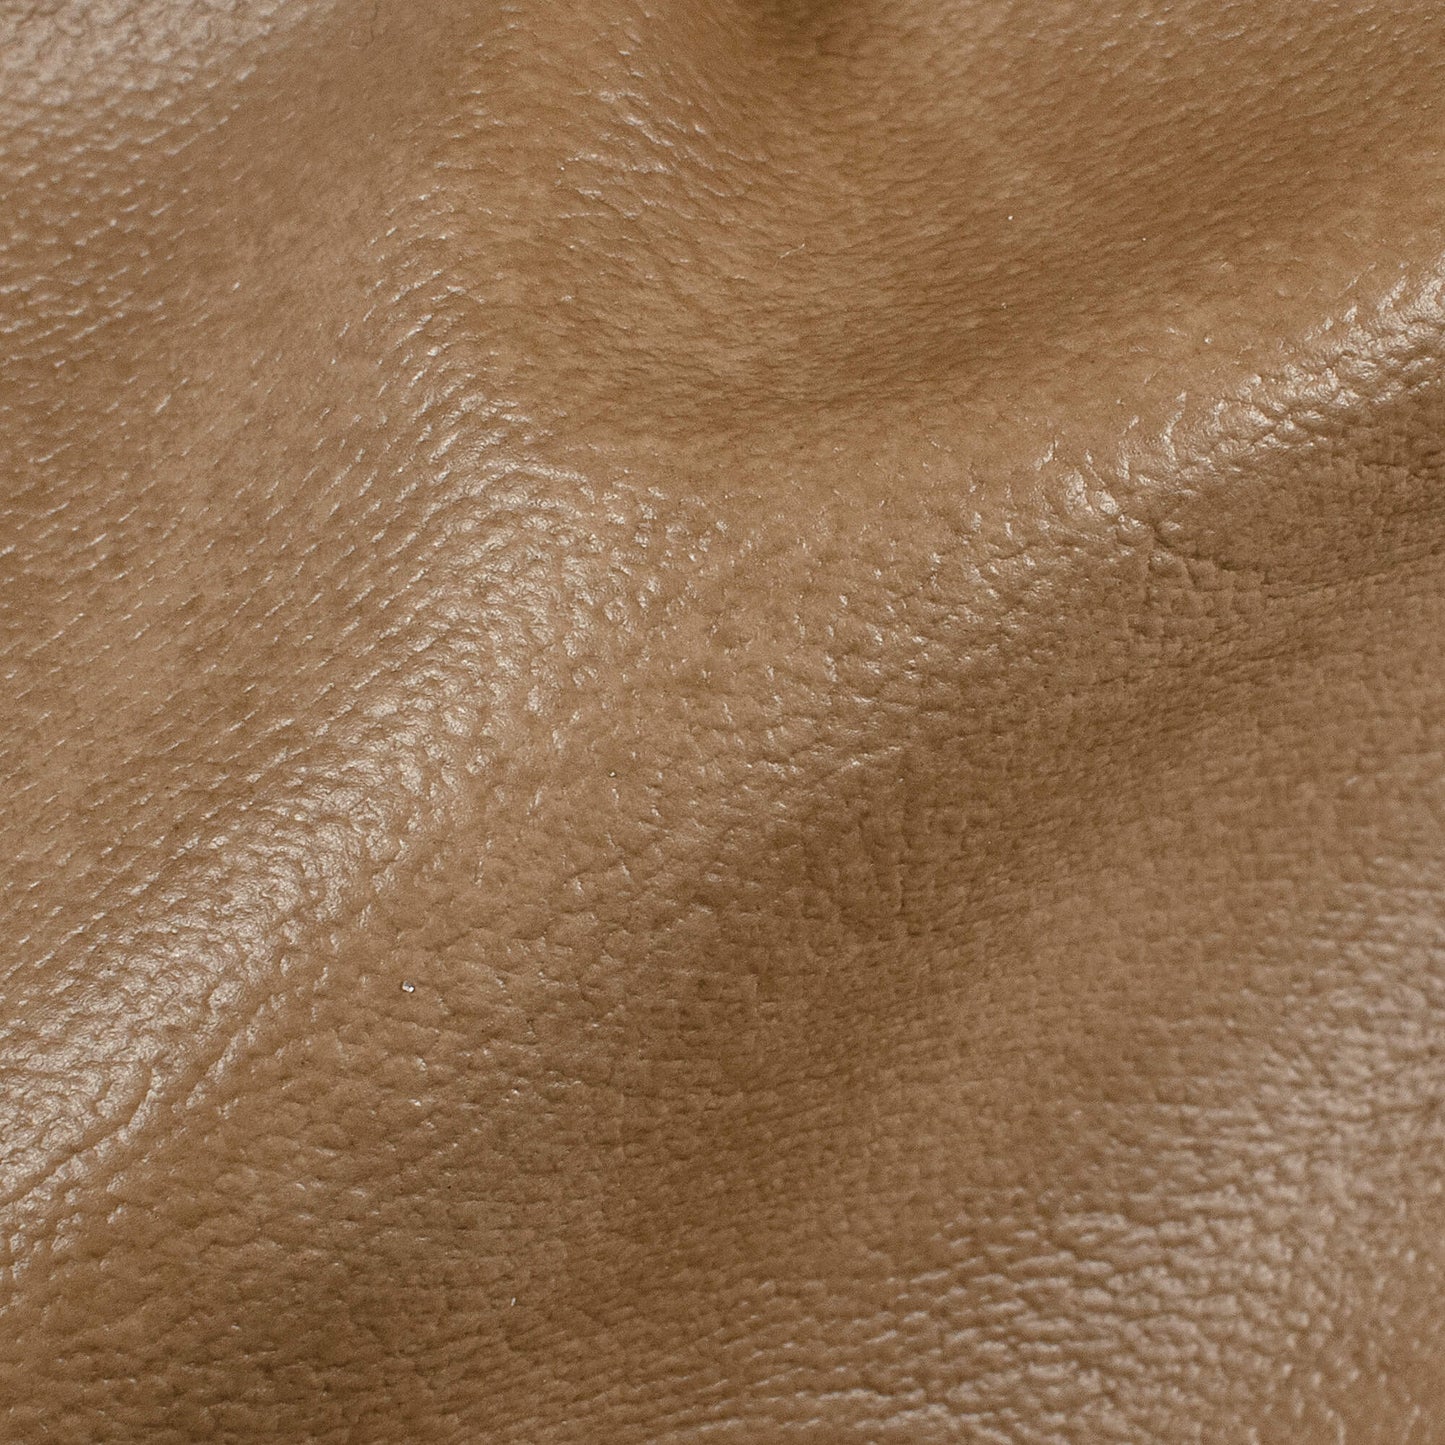 Tan Brown Self Textured Exclusive Sofa Fabric (Width 54 Inches)